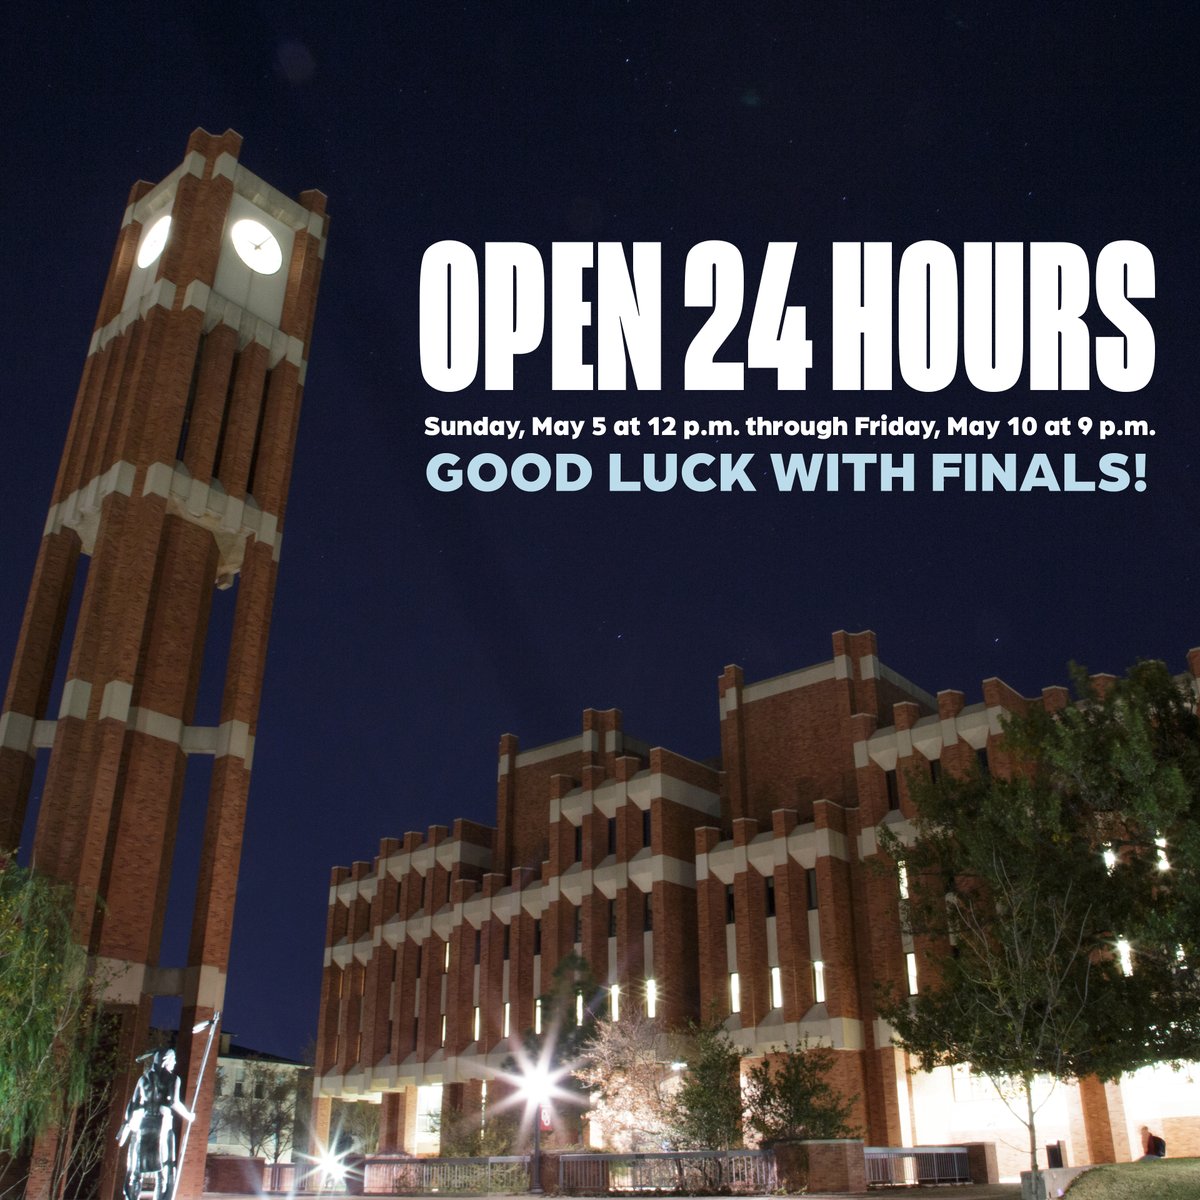 Let's try this again 🙃 Bizzell Memorial Library is now open 24 hours a day until Friday, May 10 at 9 p.m. We will not be closing. So students, come in your jammies, bring snacks and blankets, and stay awhile. And good luck with finals!